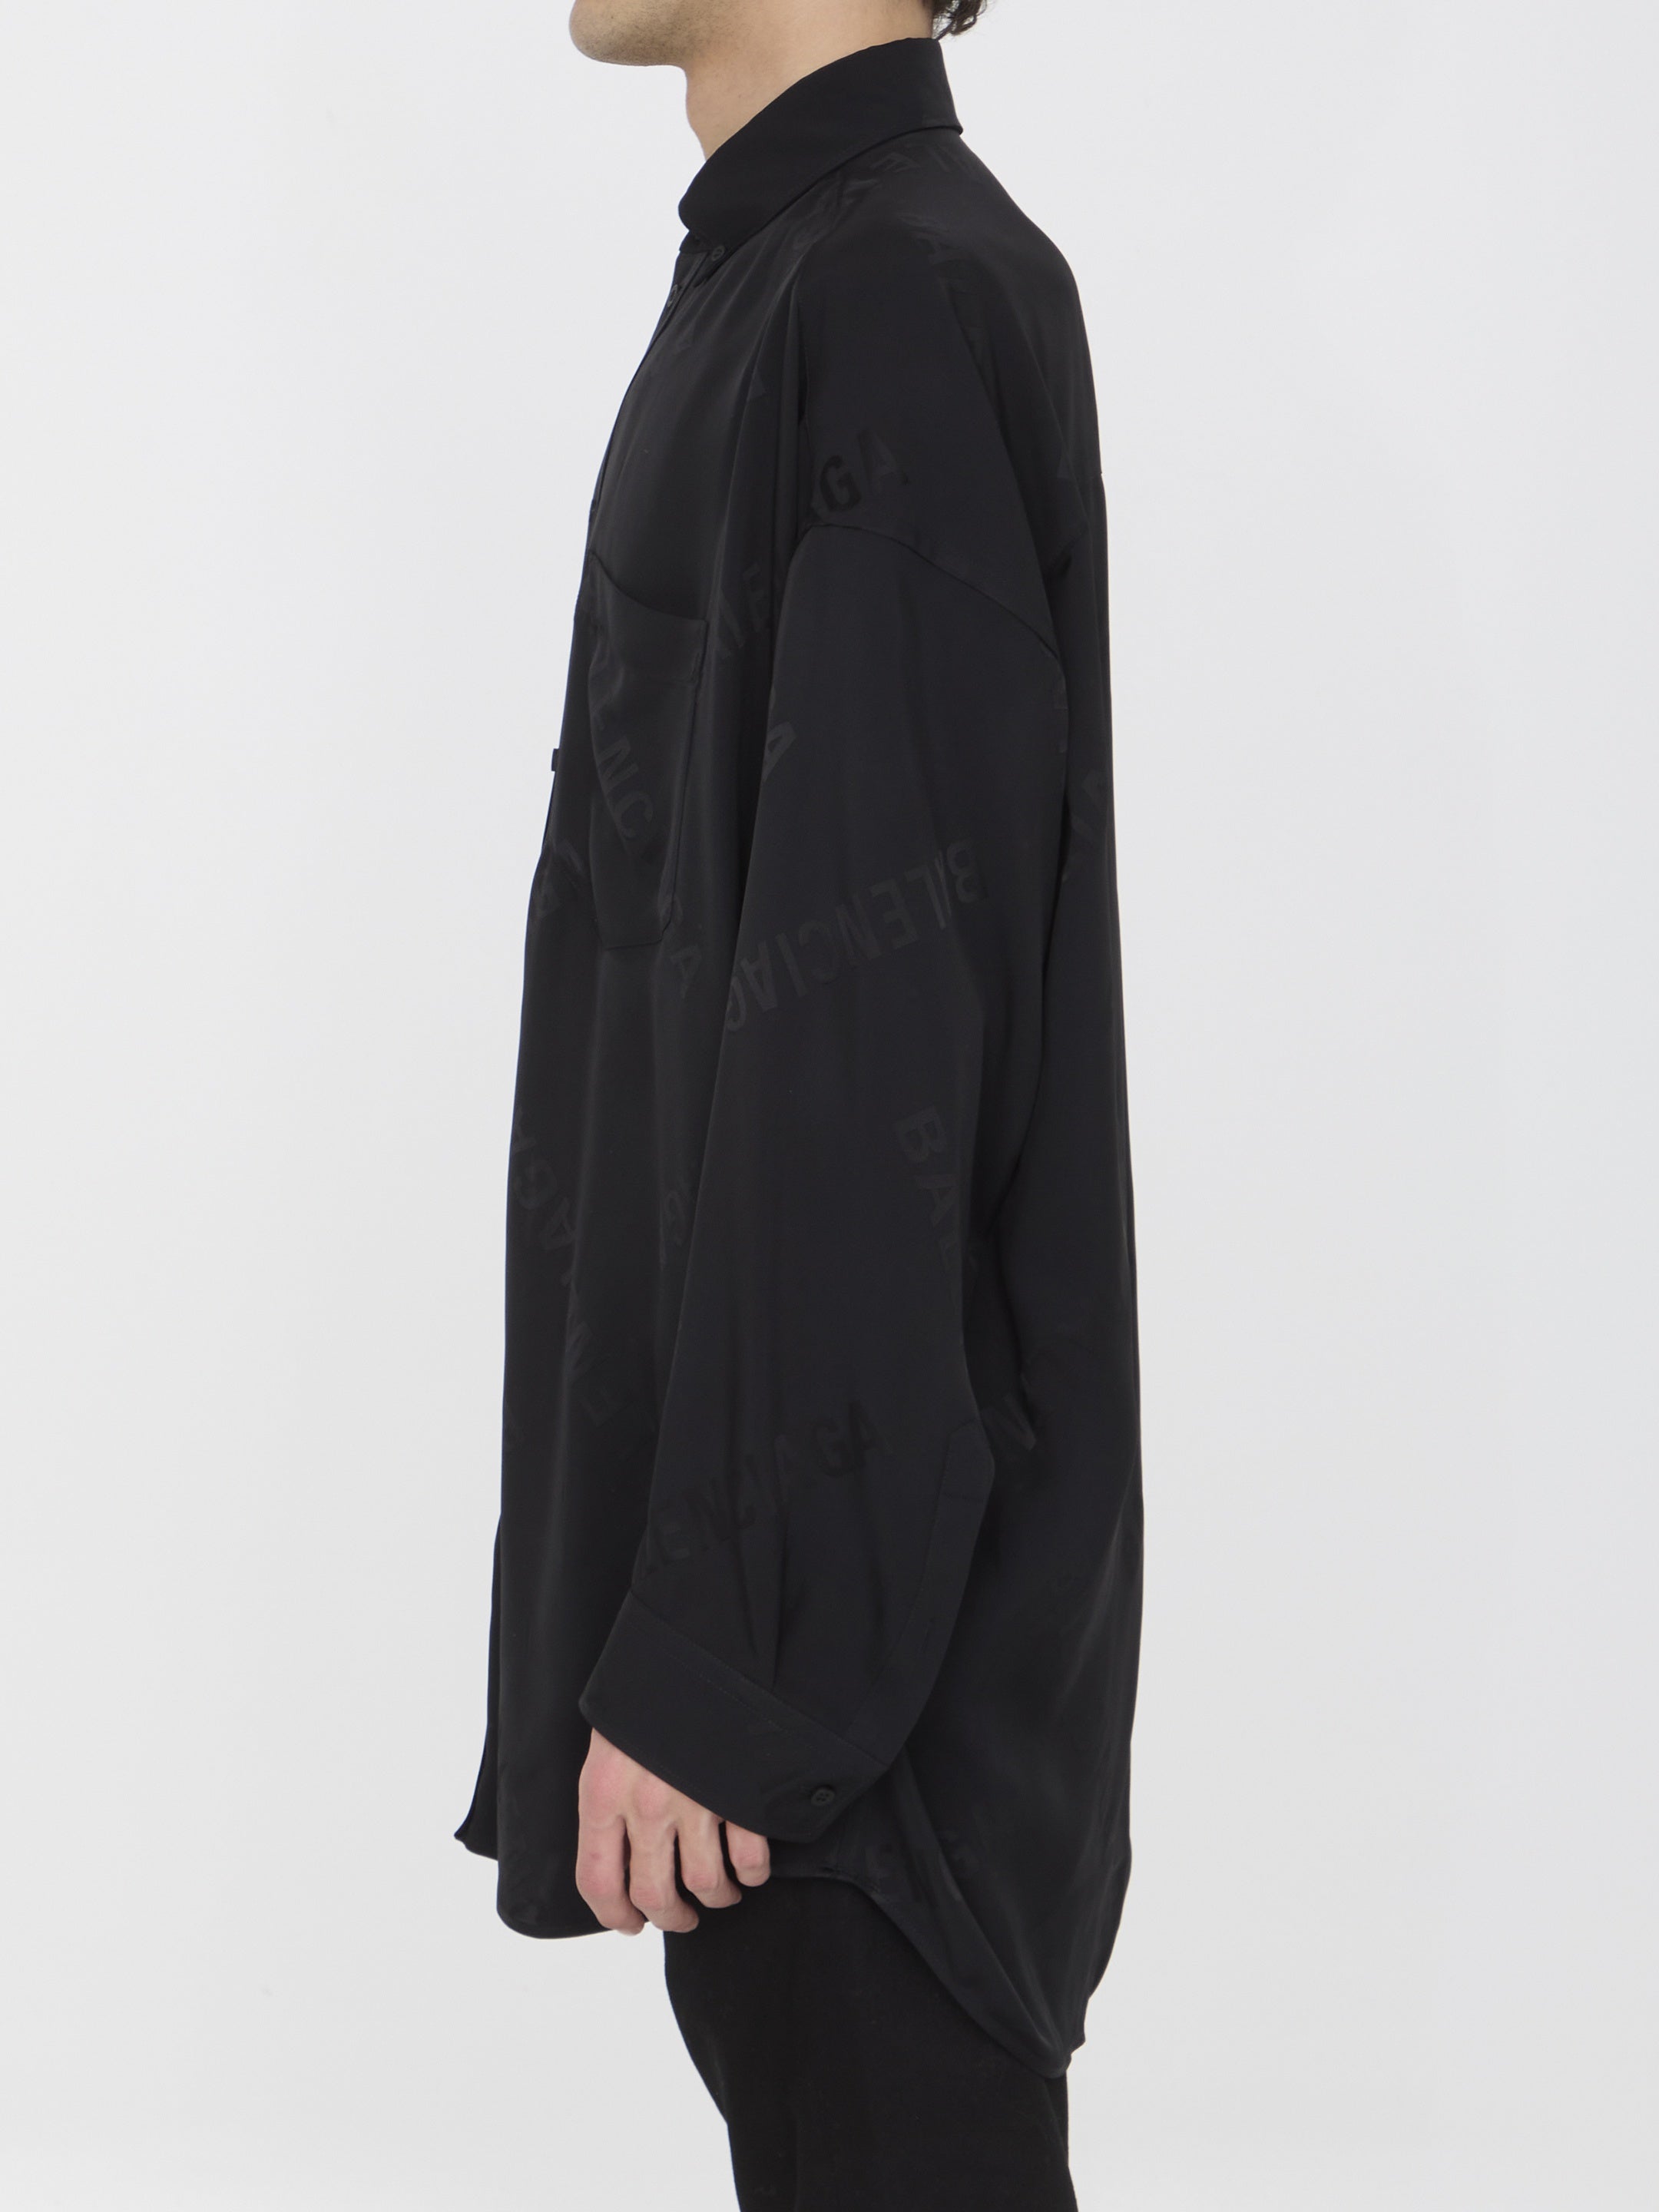 BALENCIAGA-OUTLET-SALE-Cocoon-shirt-Shirts-S-BLACK-ARCHIVE-COLLECTION-3.jpg